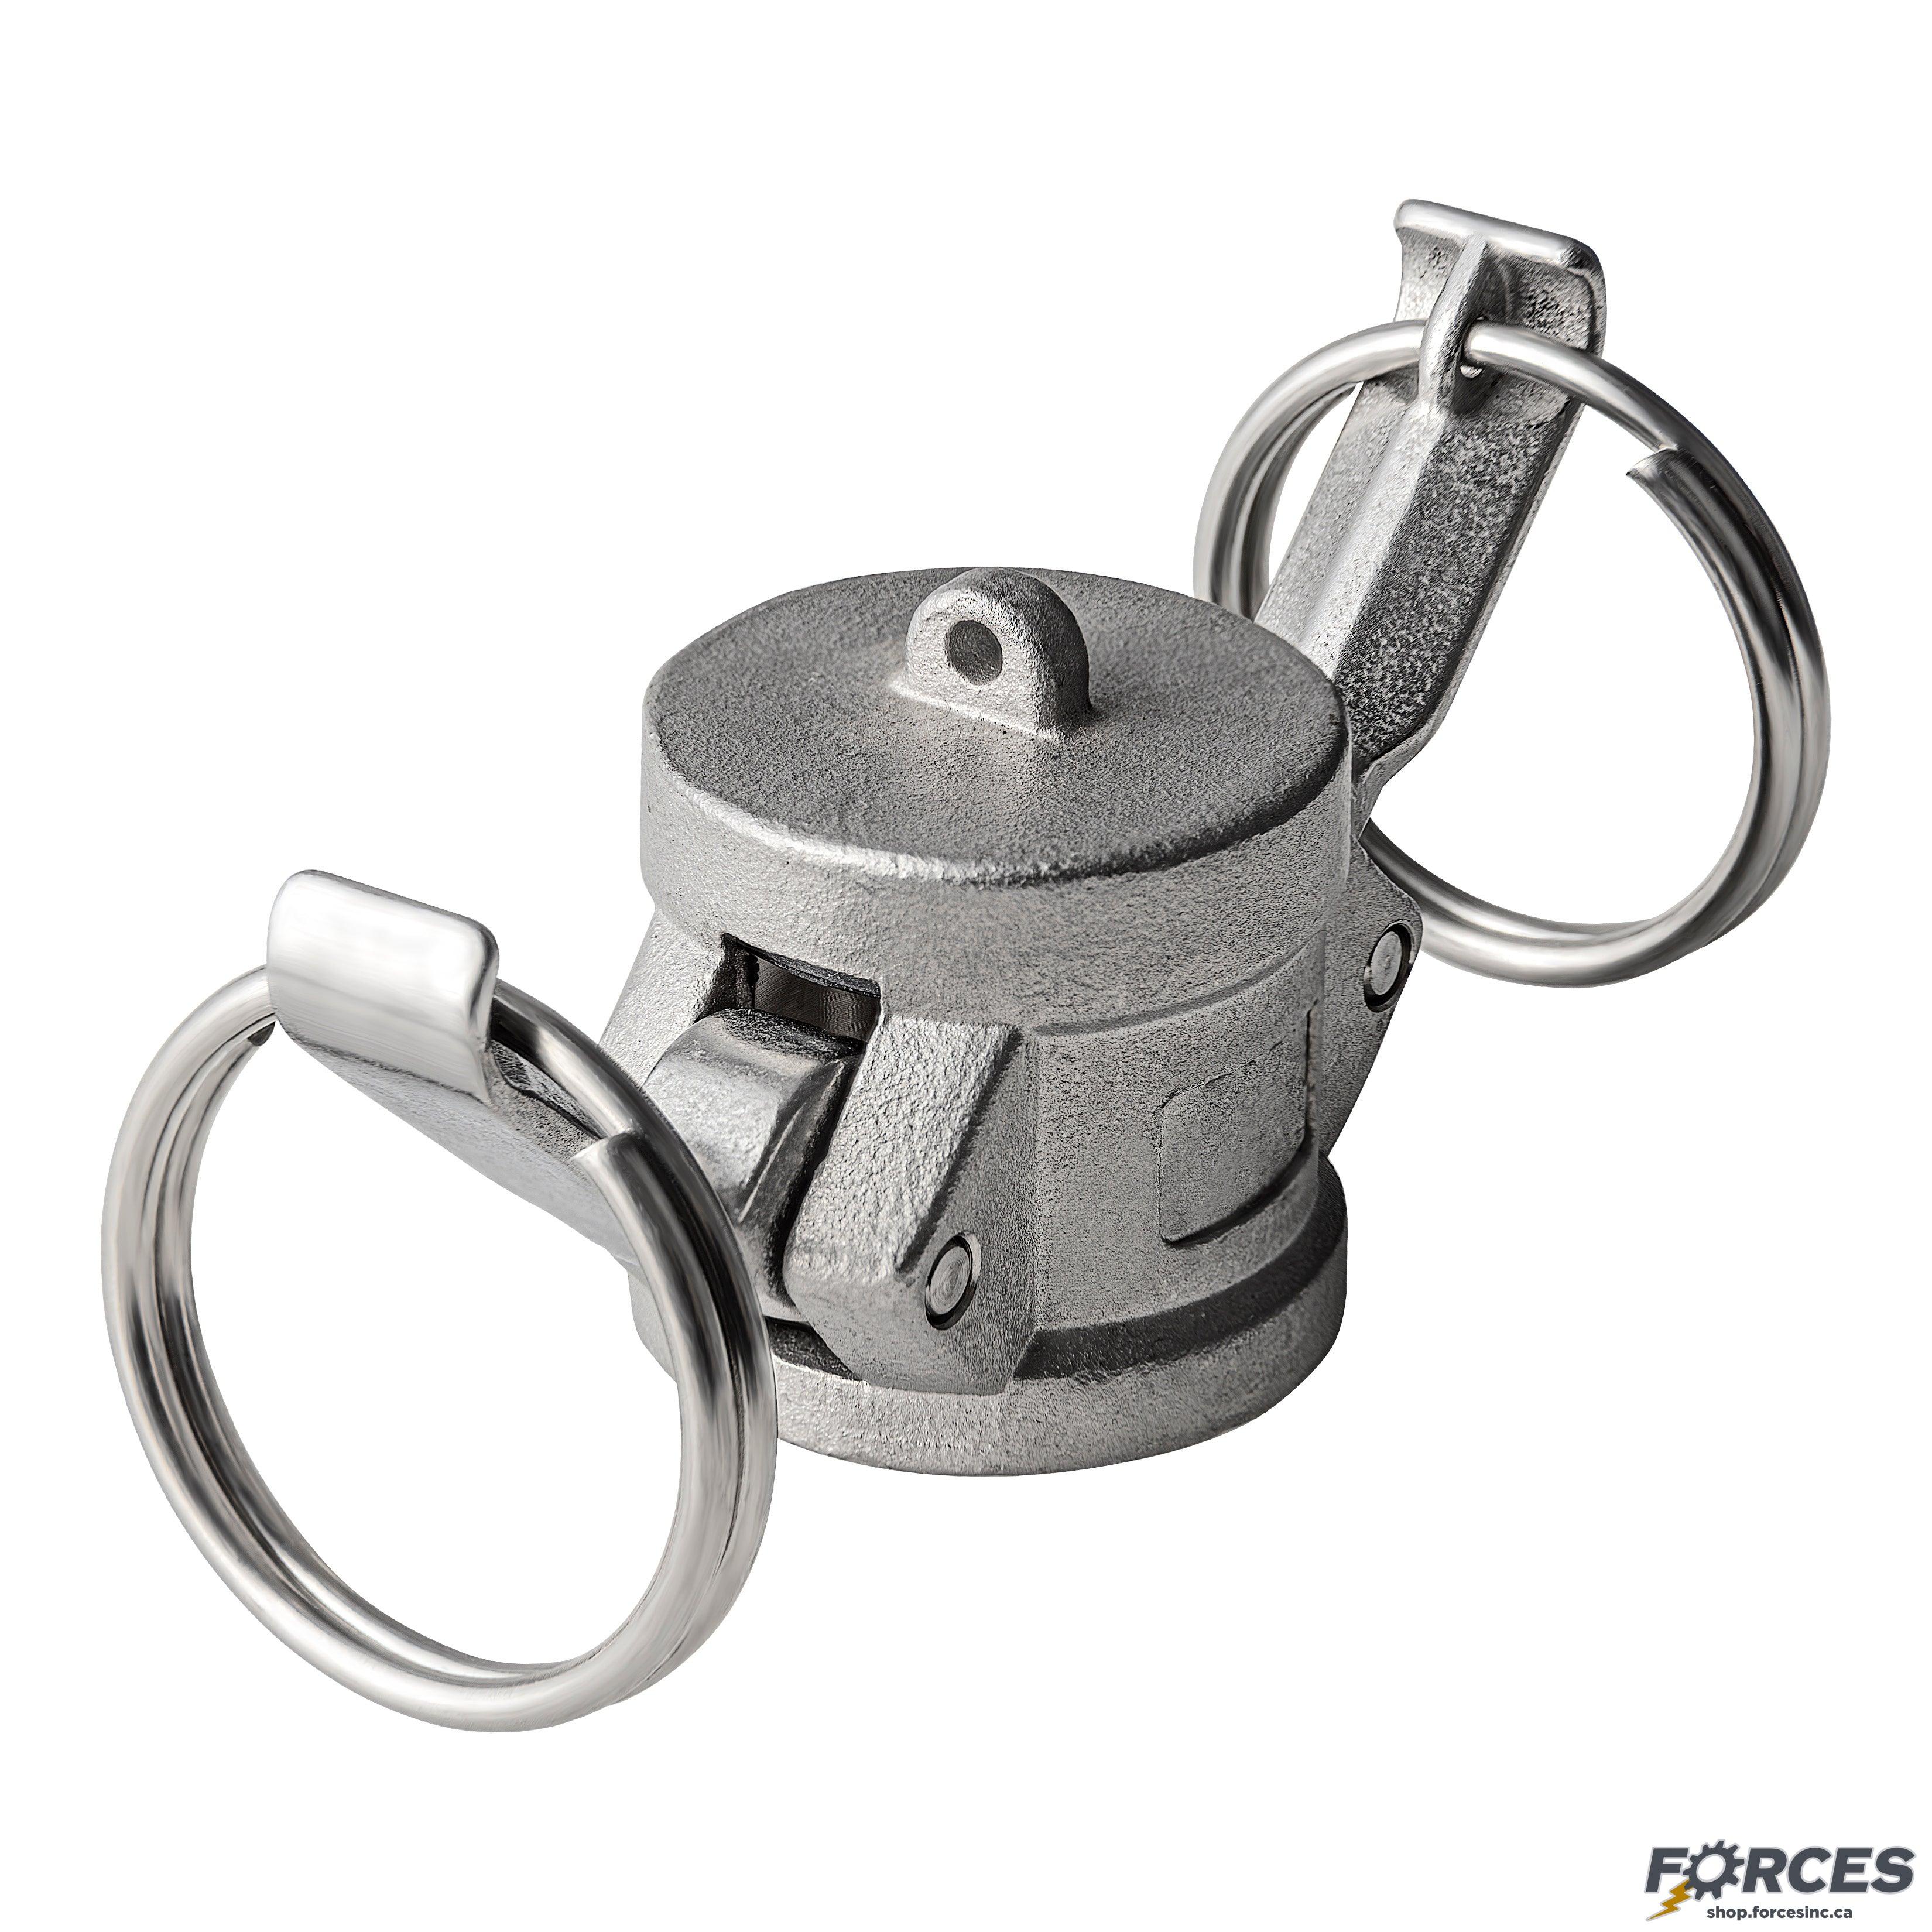 3/4" Type DC Camlock Fitting Stainless Steel 316 - Forces Inc